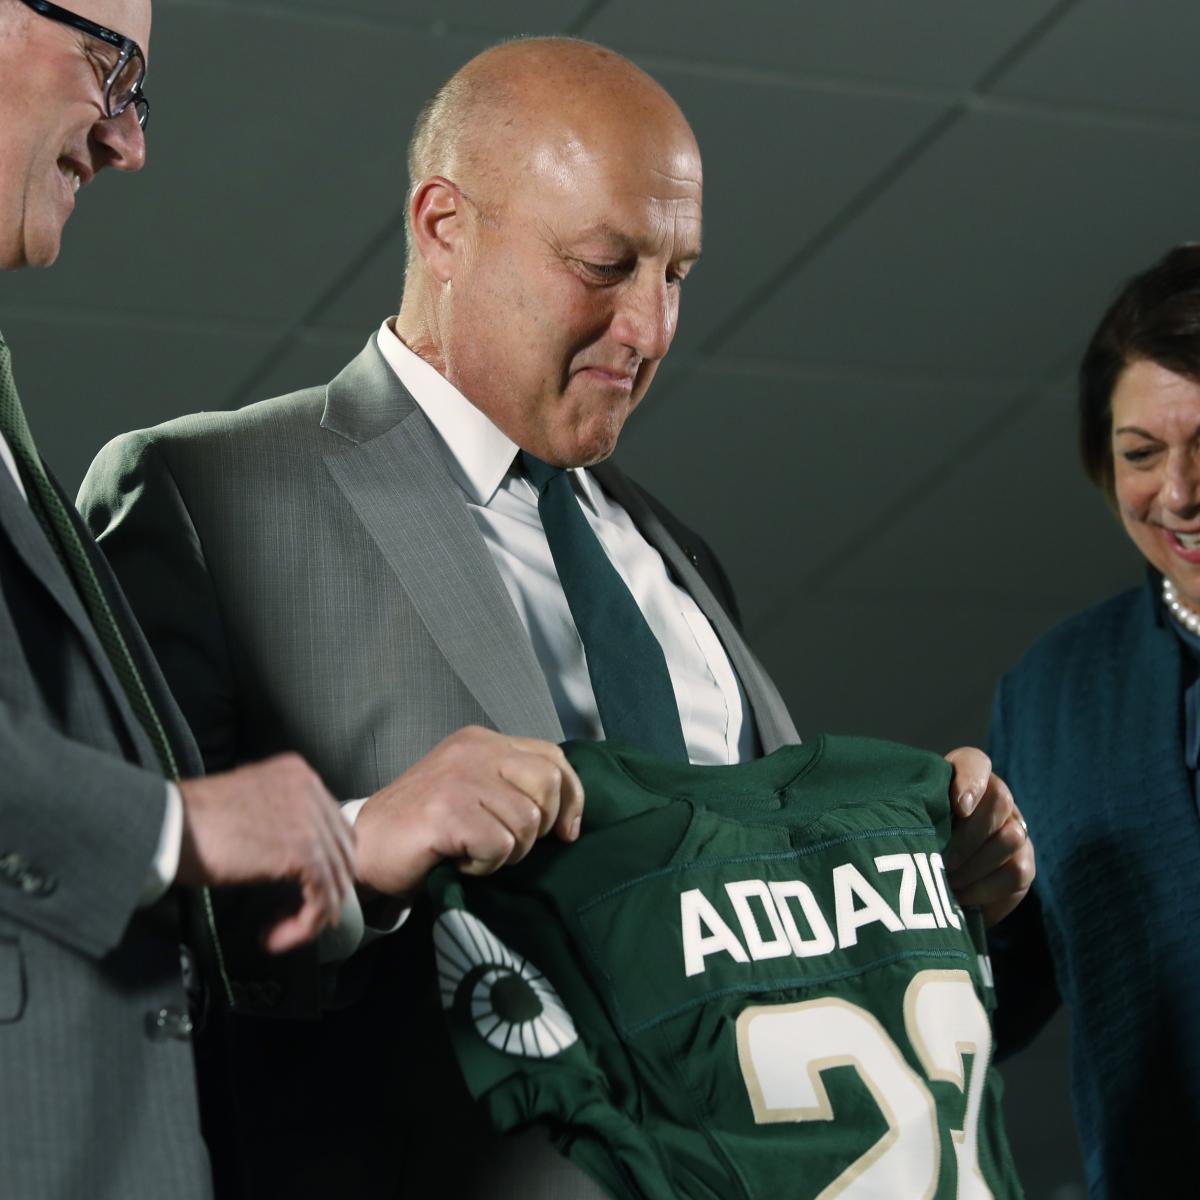 CSU Football Opens Investigation into Allegations of Racism, Verbal Abuse thumbnail